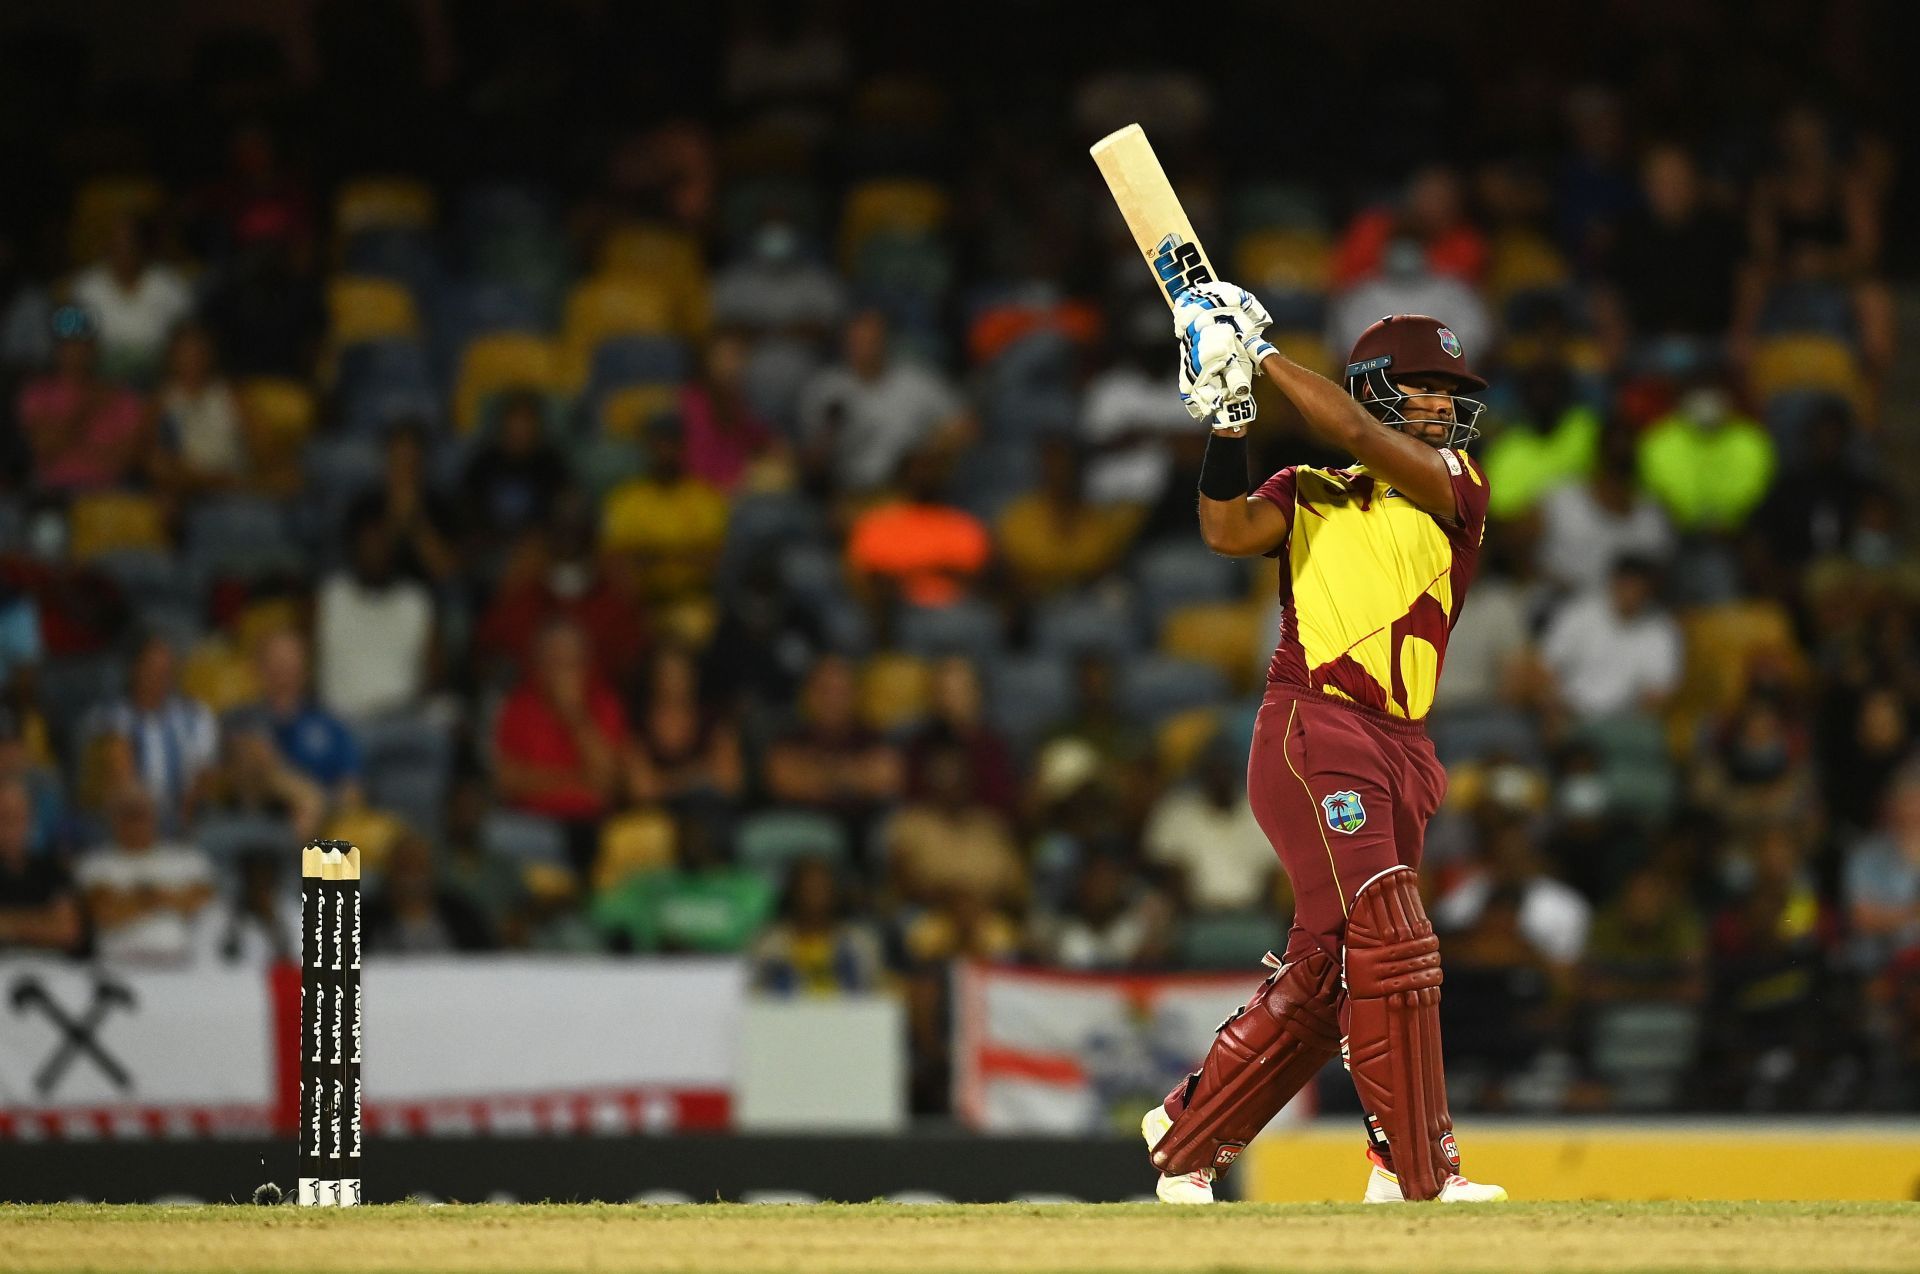 West Indies will look to build on the momentum they generated by winning the second match against India.